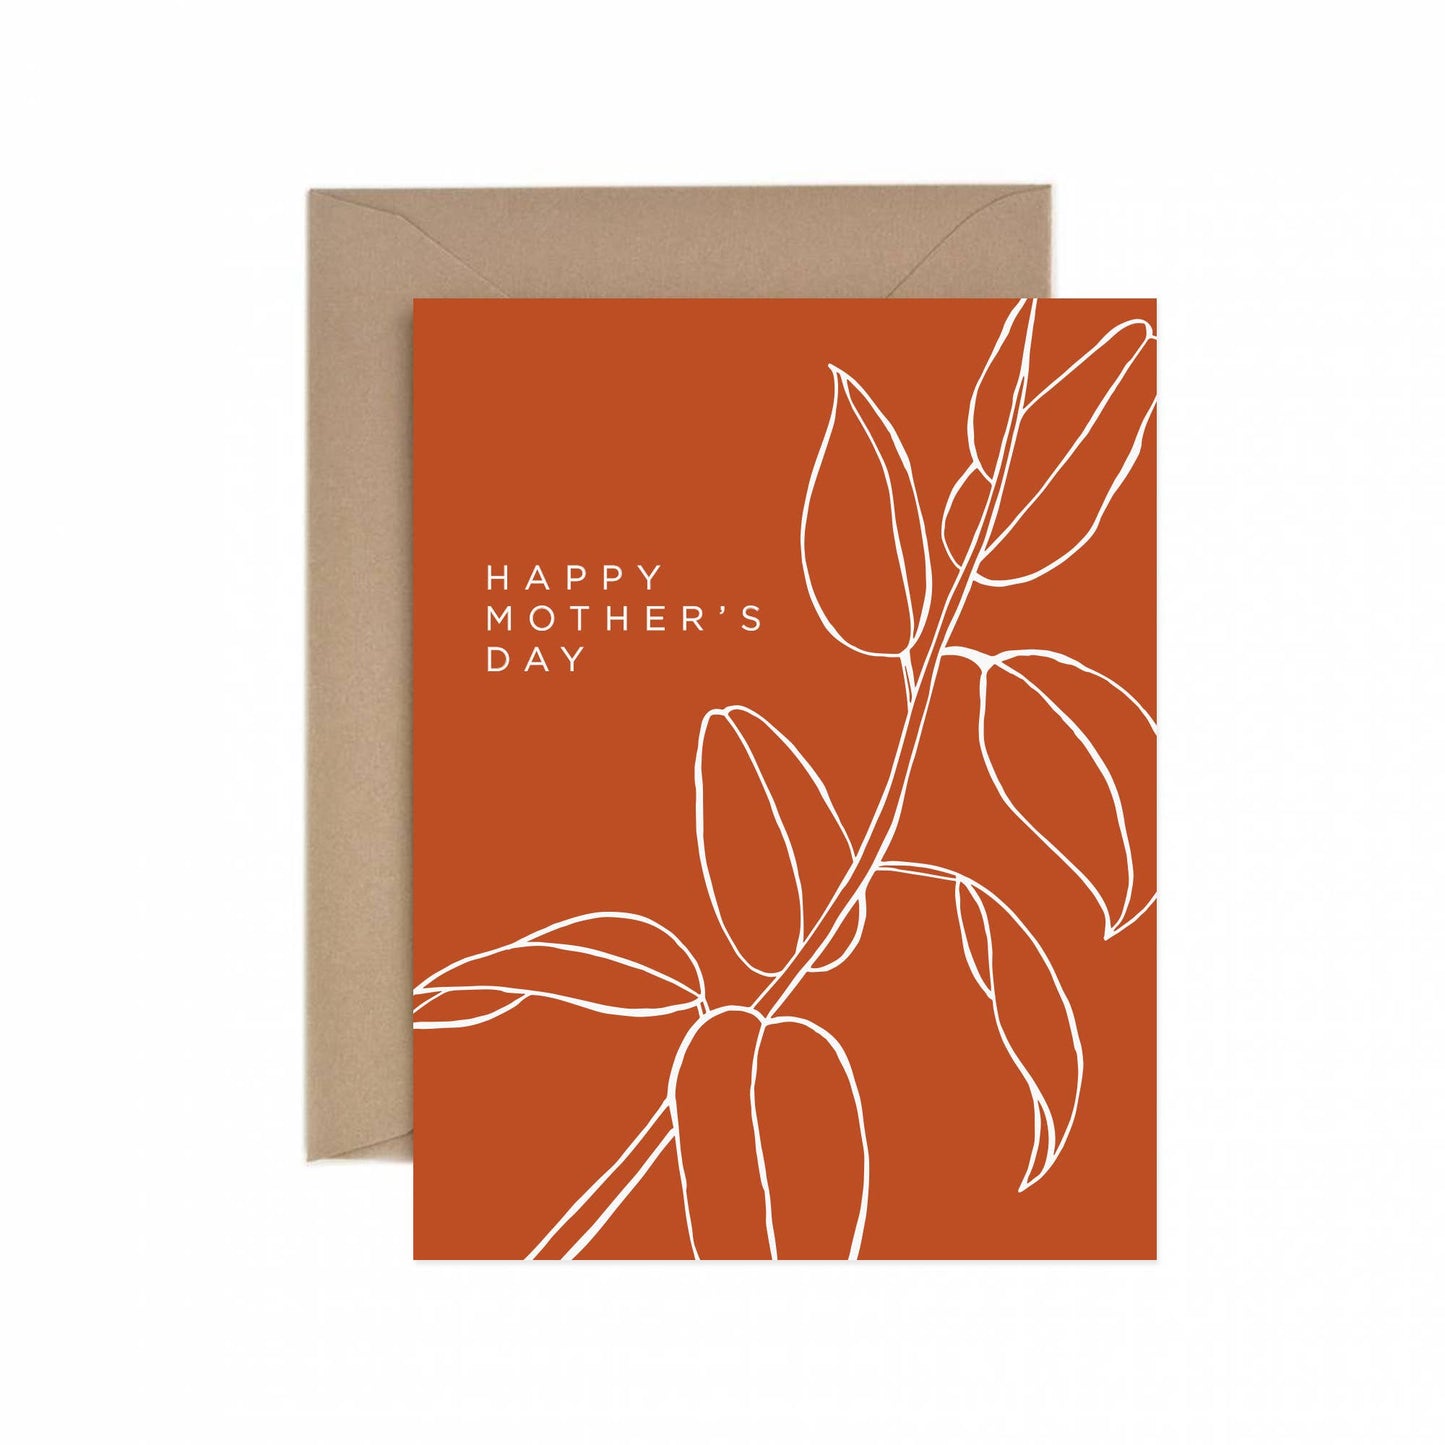 Happy Mother's Day Warm Greeting Card